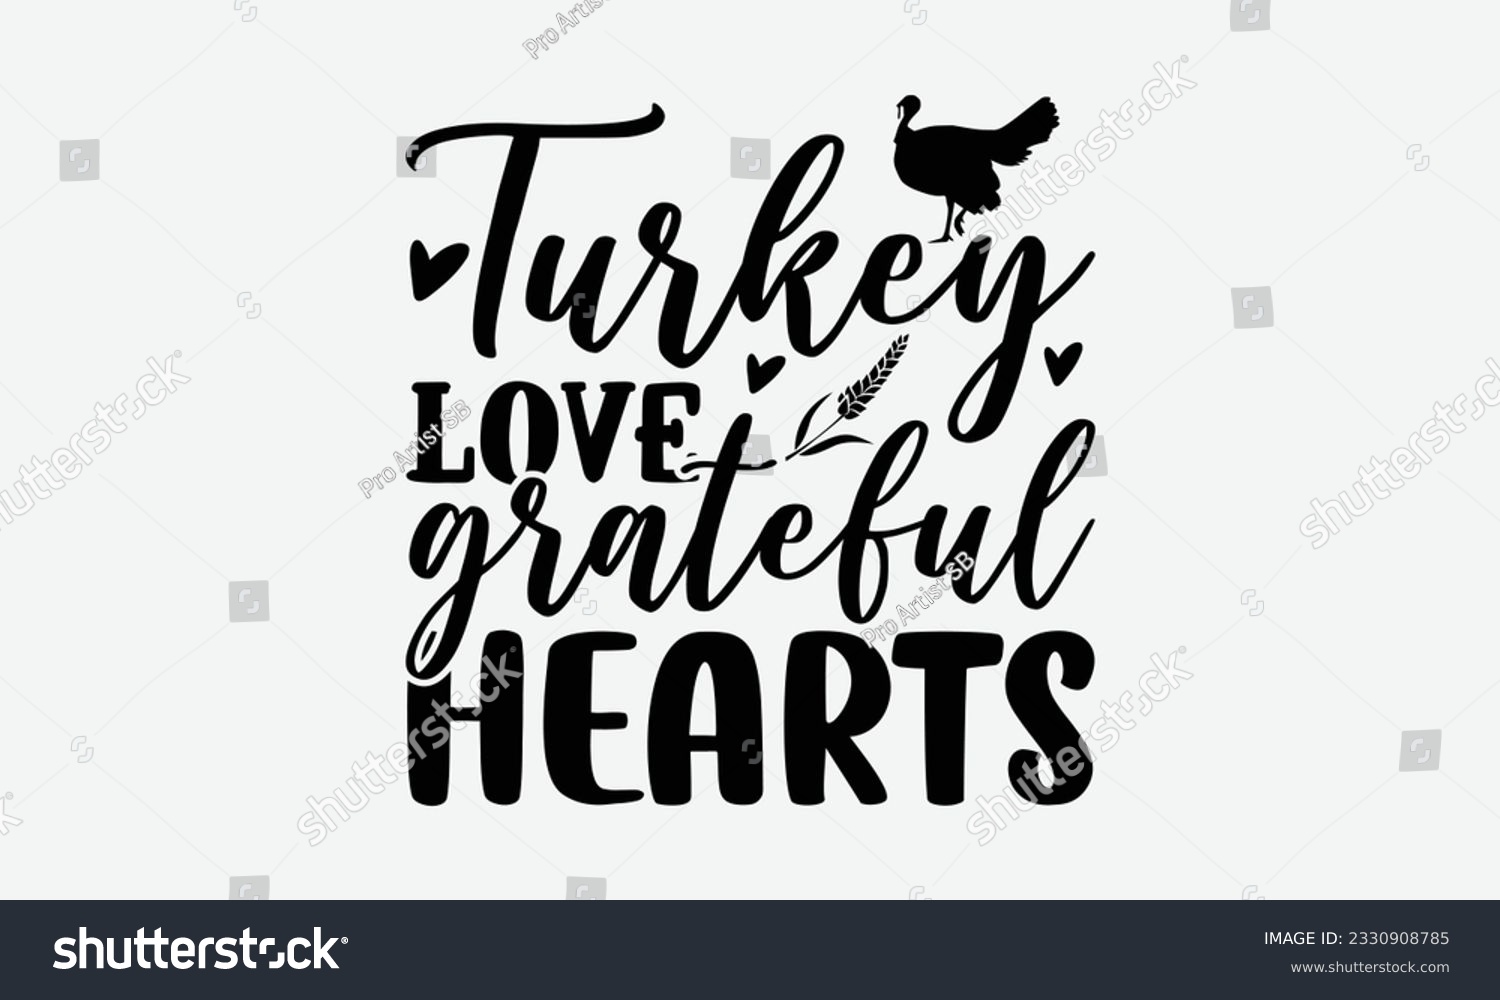 SVG of Turkey Love Grateful Hearts - Thanksgiving T-shirt Design Template, Thanksgiving Quotes File, Hand Drawn Lettering Phrase, SVG Files for Cutting Cricut and Silhouette. svg